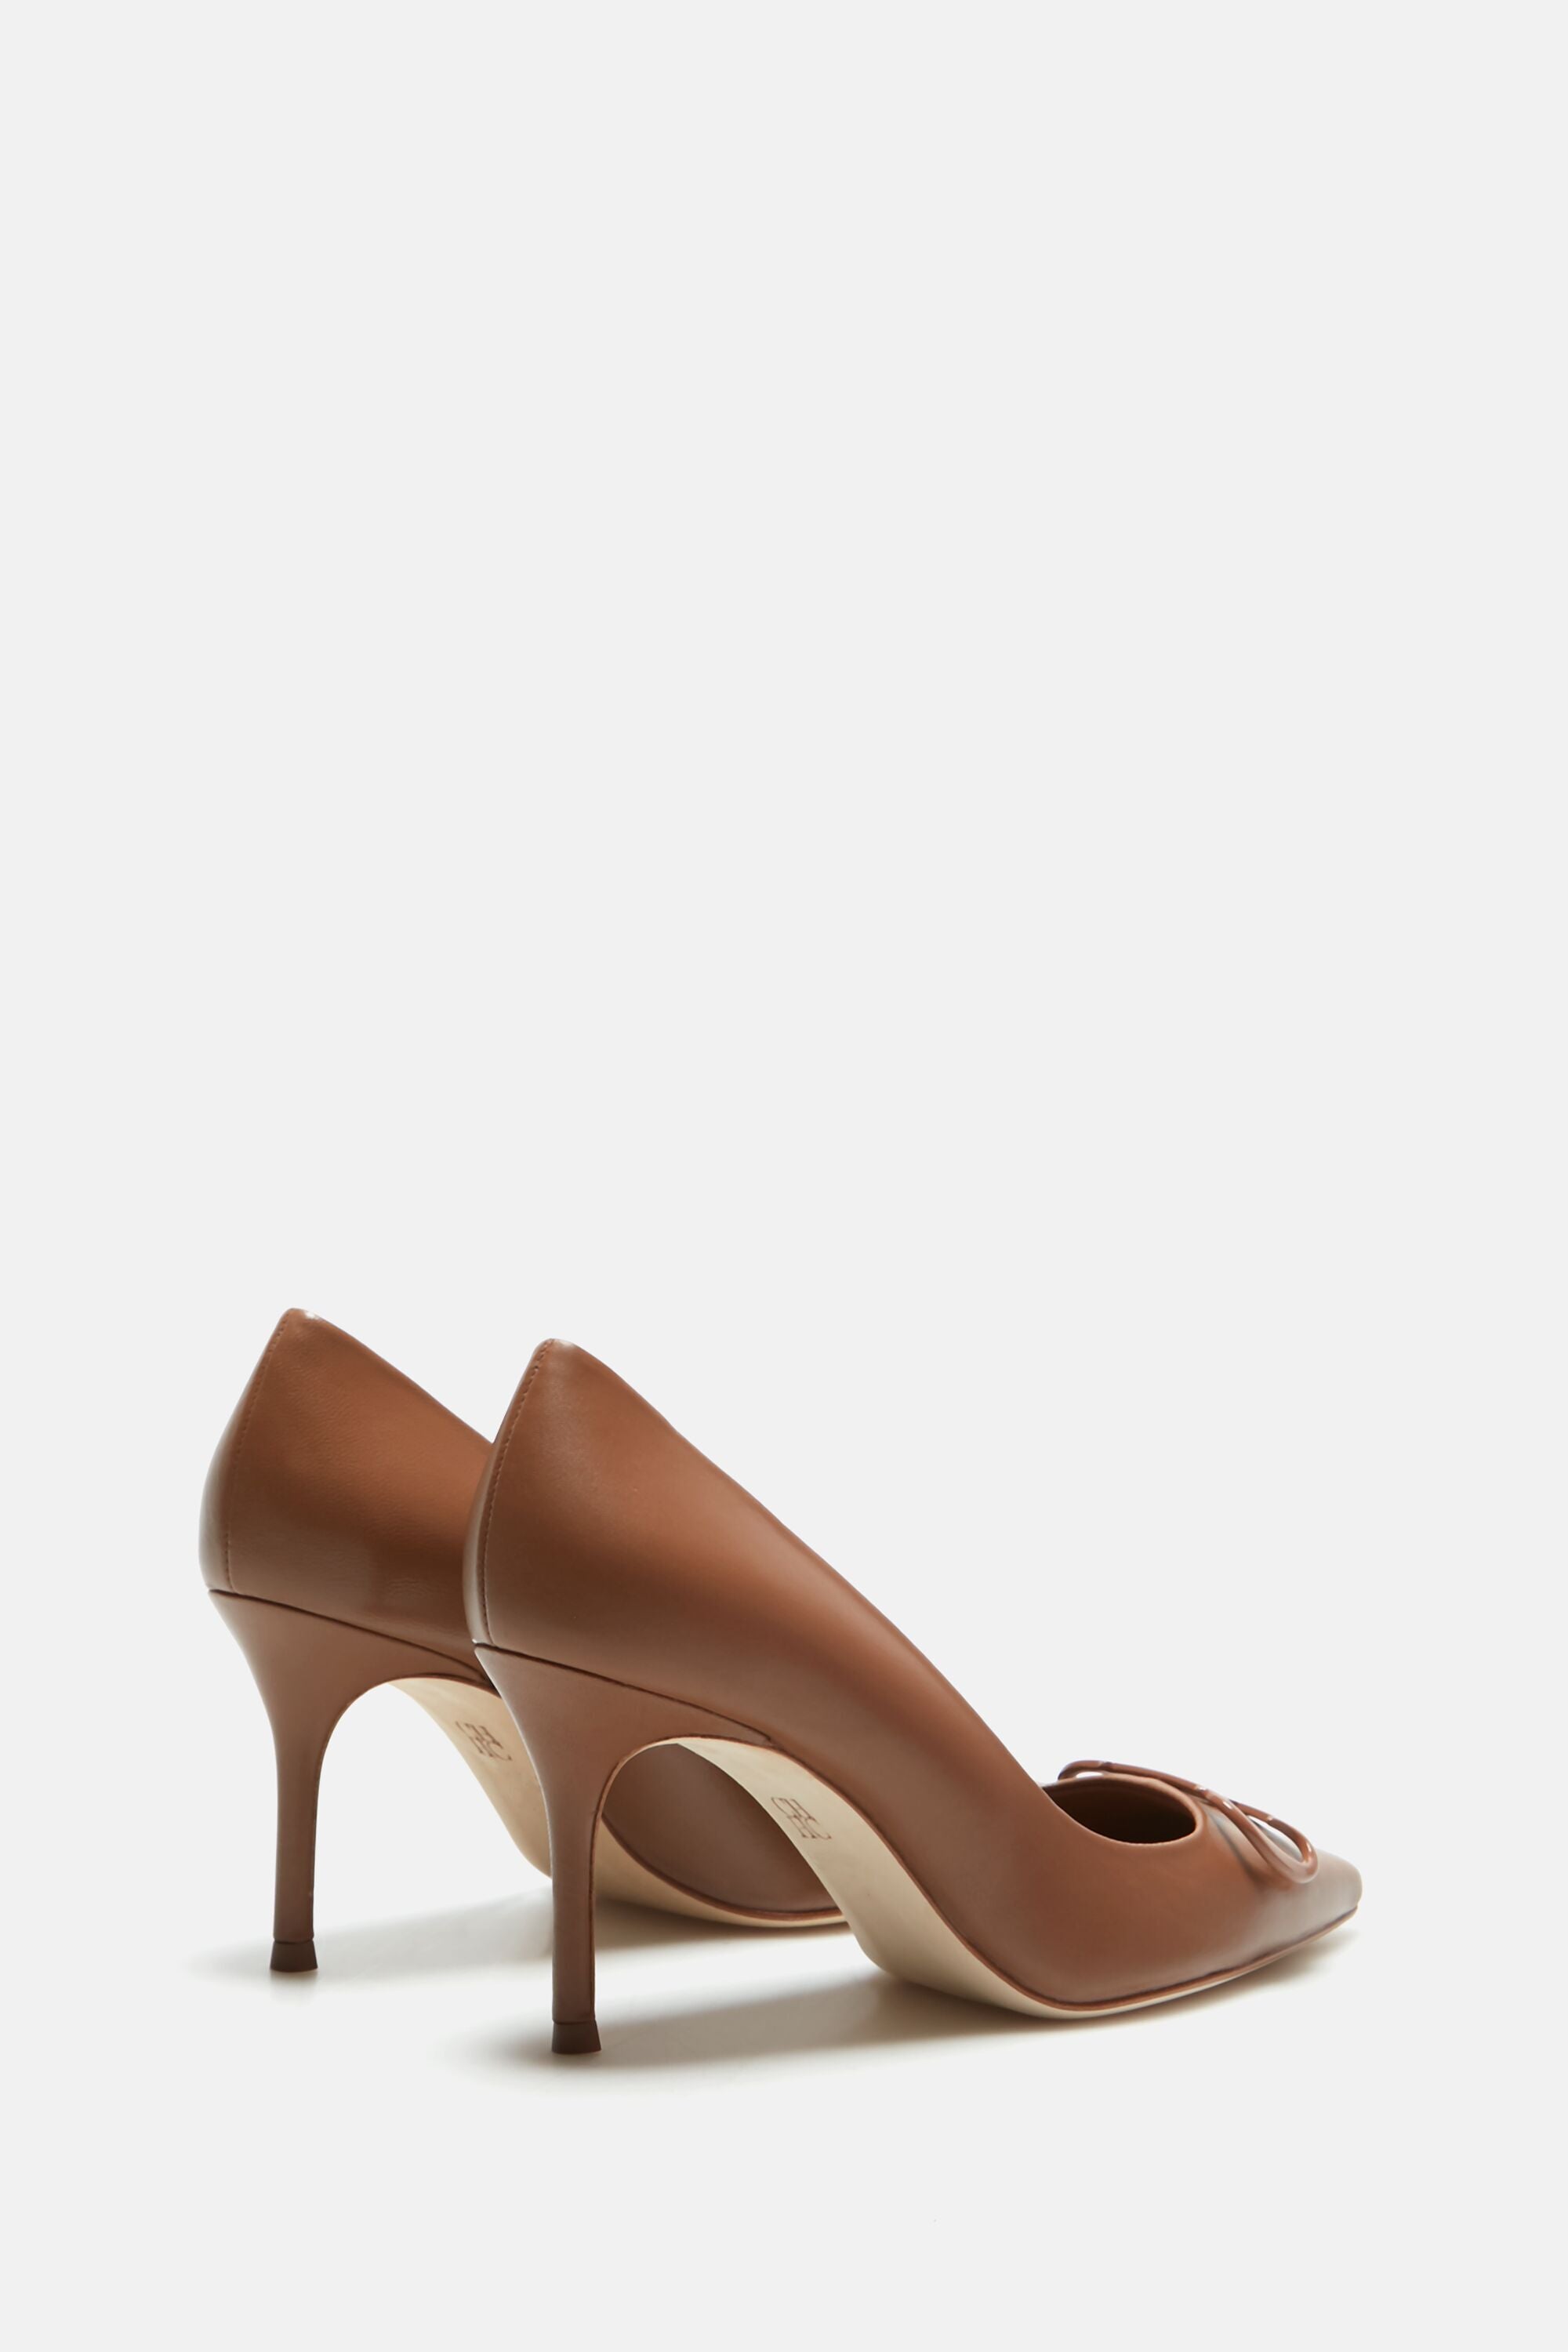 Lib Square Toe Chunky Low Heels Classic Style Vintage Pumps - Brown in Sexy  Heels & Platforms - $57.19